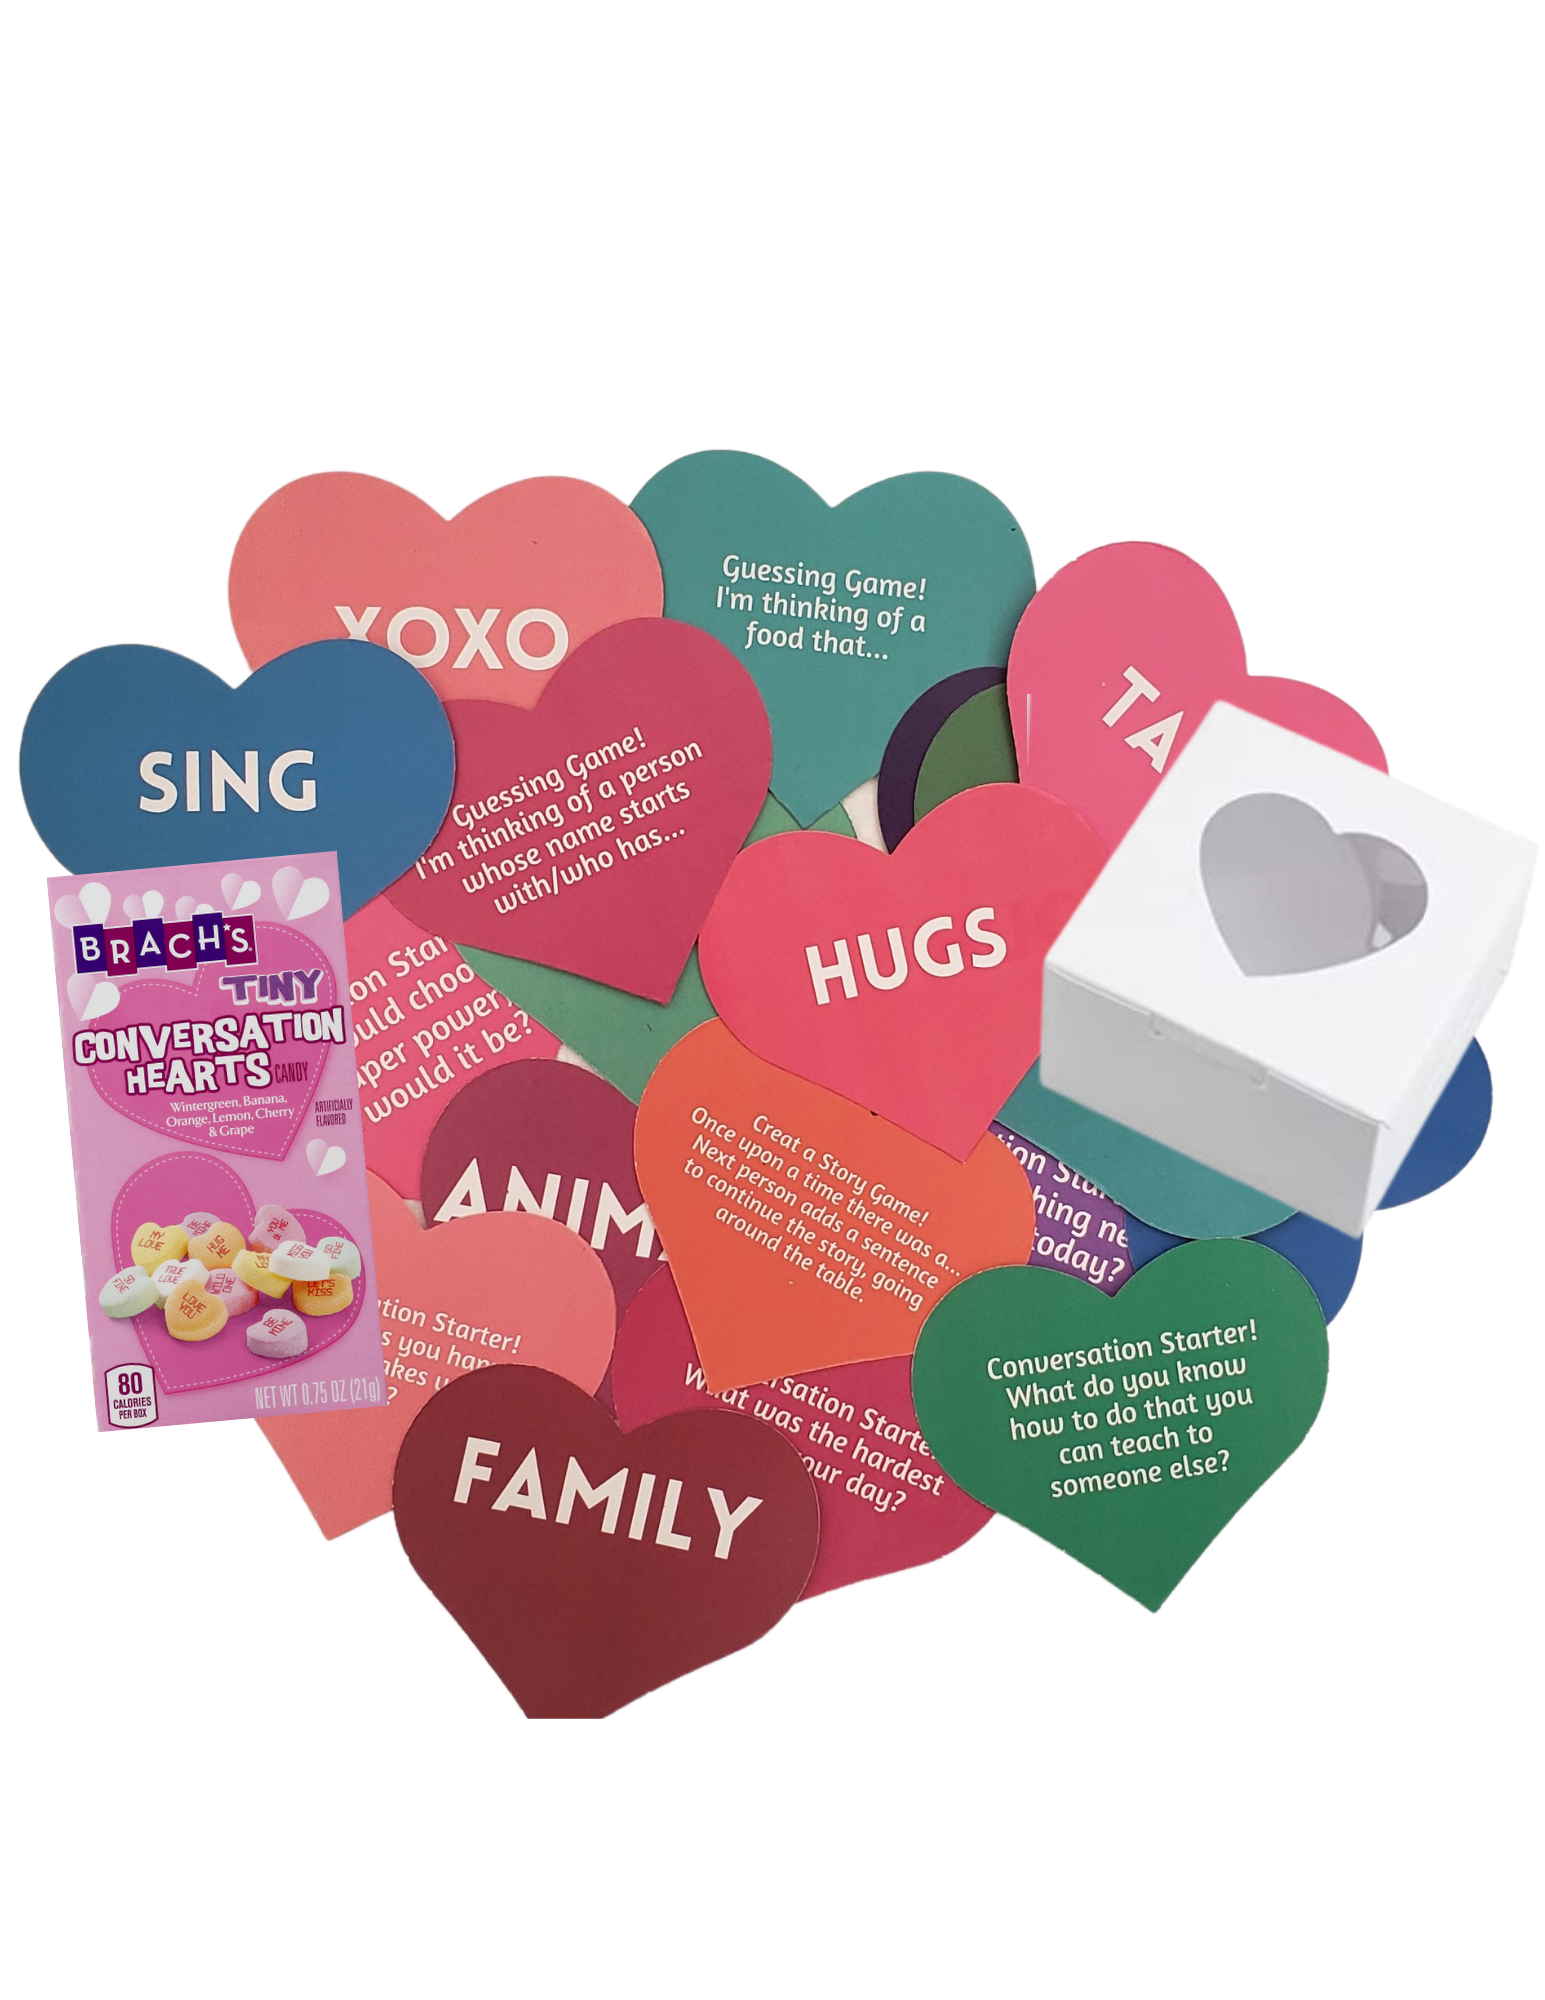 Paper hearts with questions, heart box, conversation hearts candy box